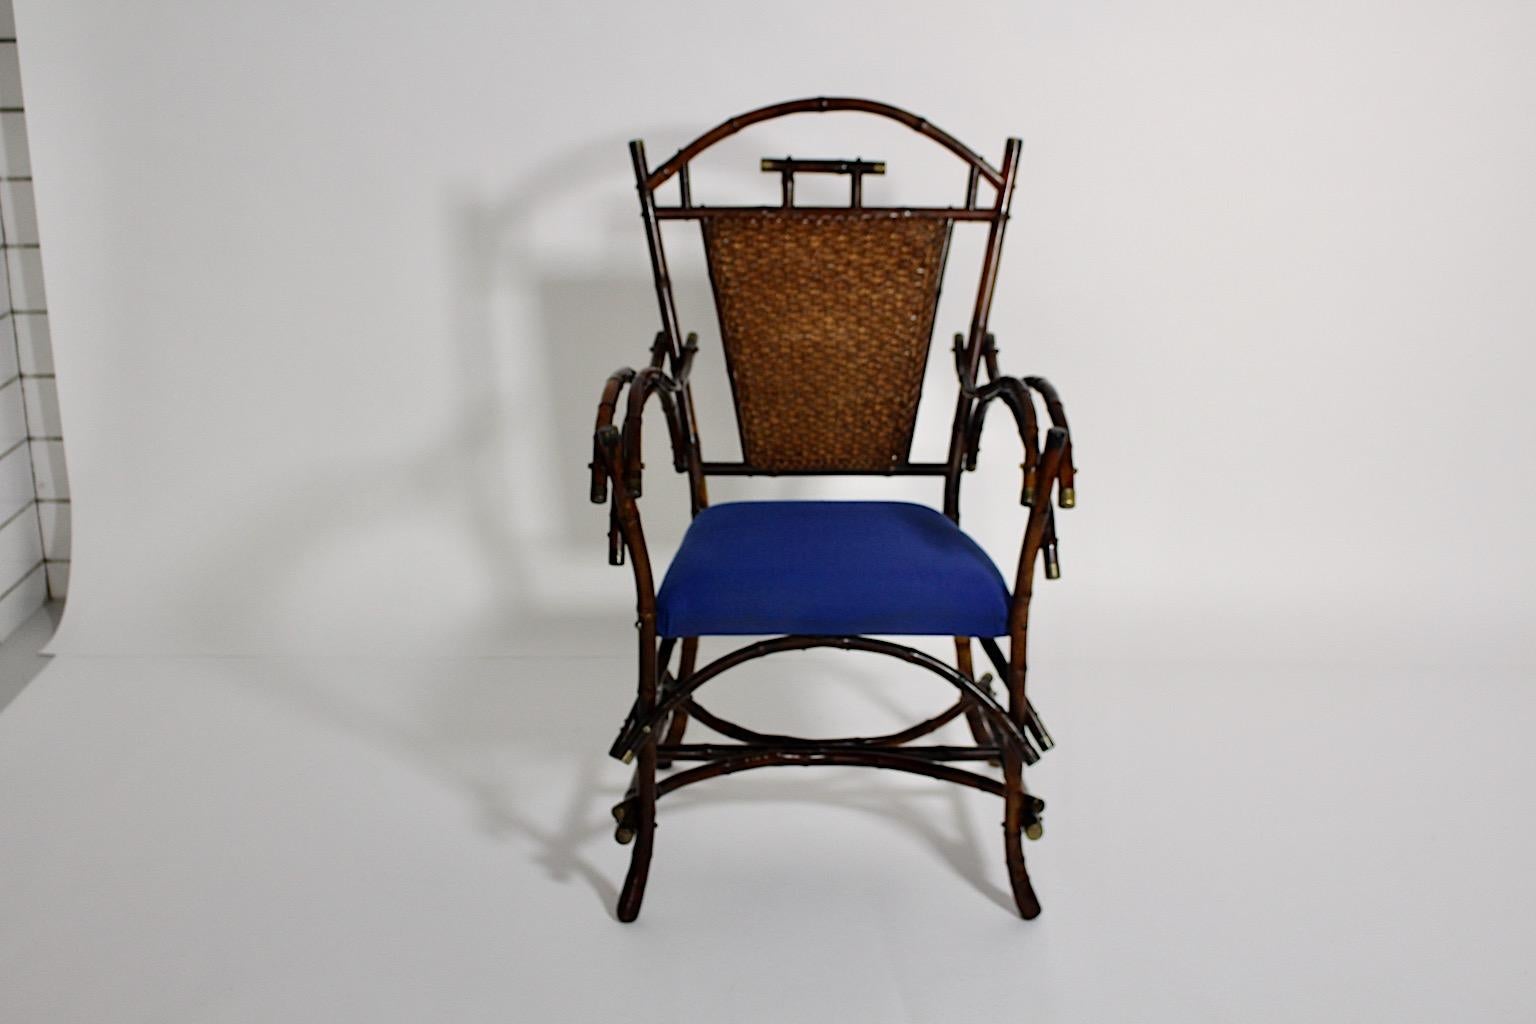 Jugendstil vintage armchair or side chair from rattan bamboo designed and made circa 1915 Vienna.
A high quality arm chair or side chair from bent bamboo with nickel plated end pieces and a royal blue upholstered seat from textile fabric.
Balancing